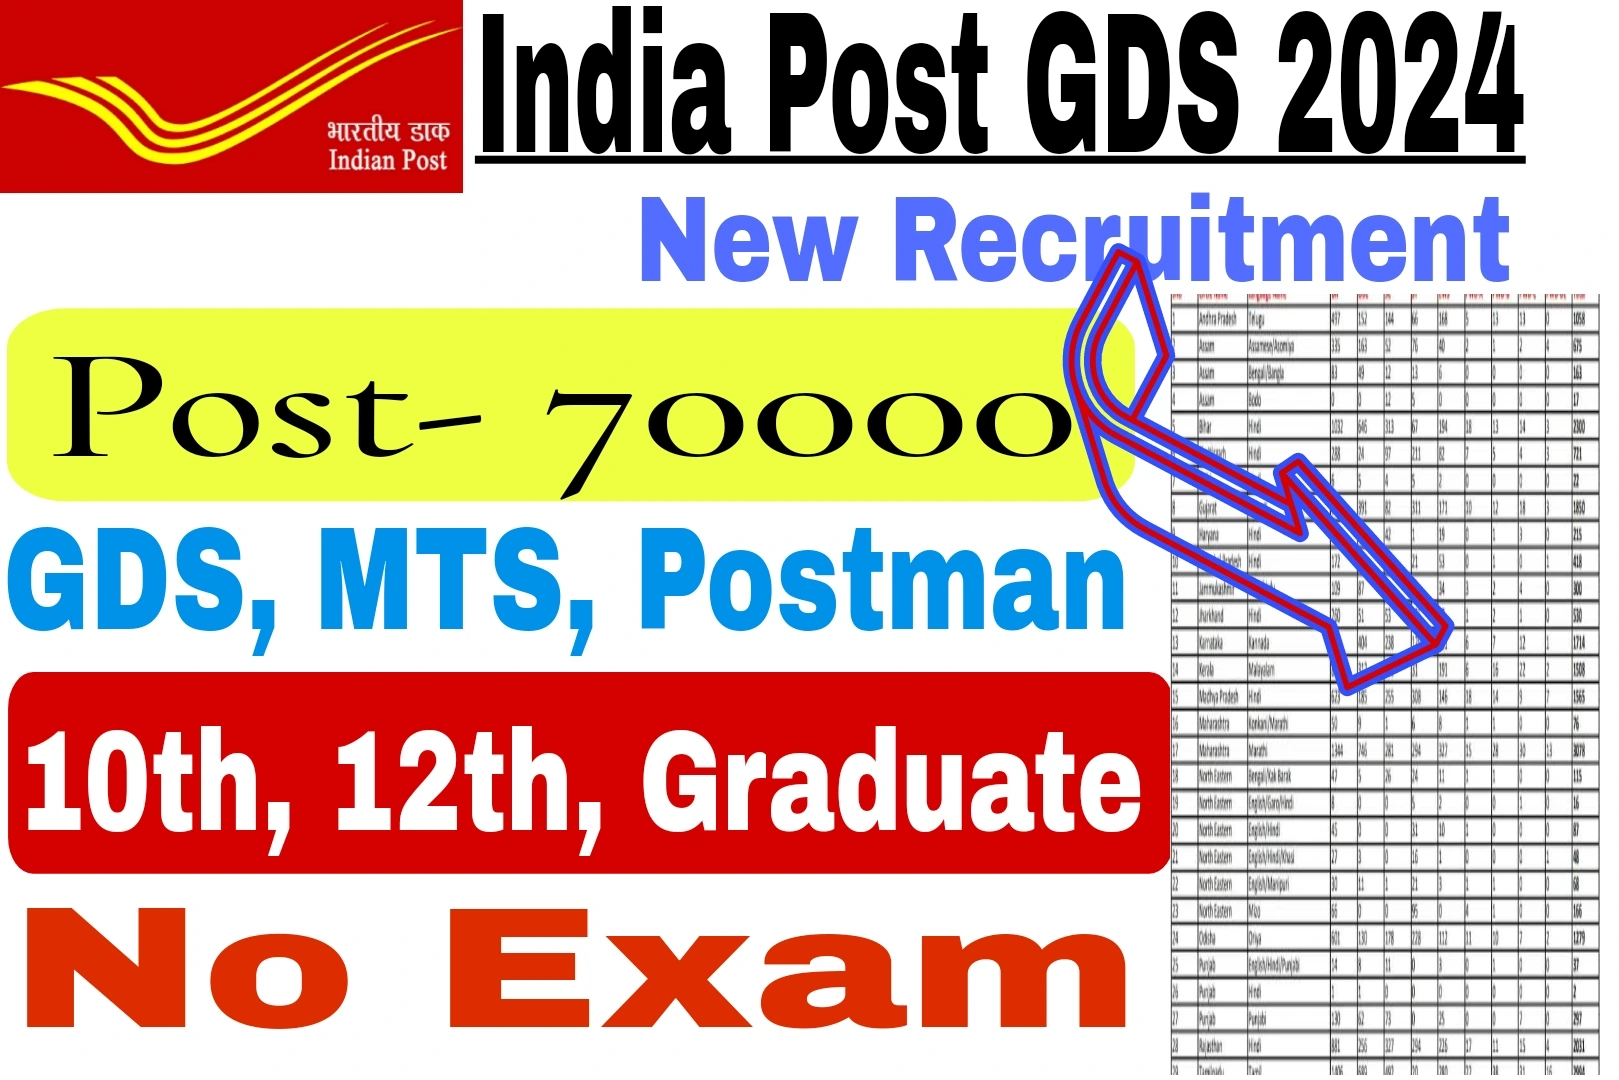 India Post Gds Recruitment Notification Apply Form